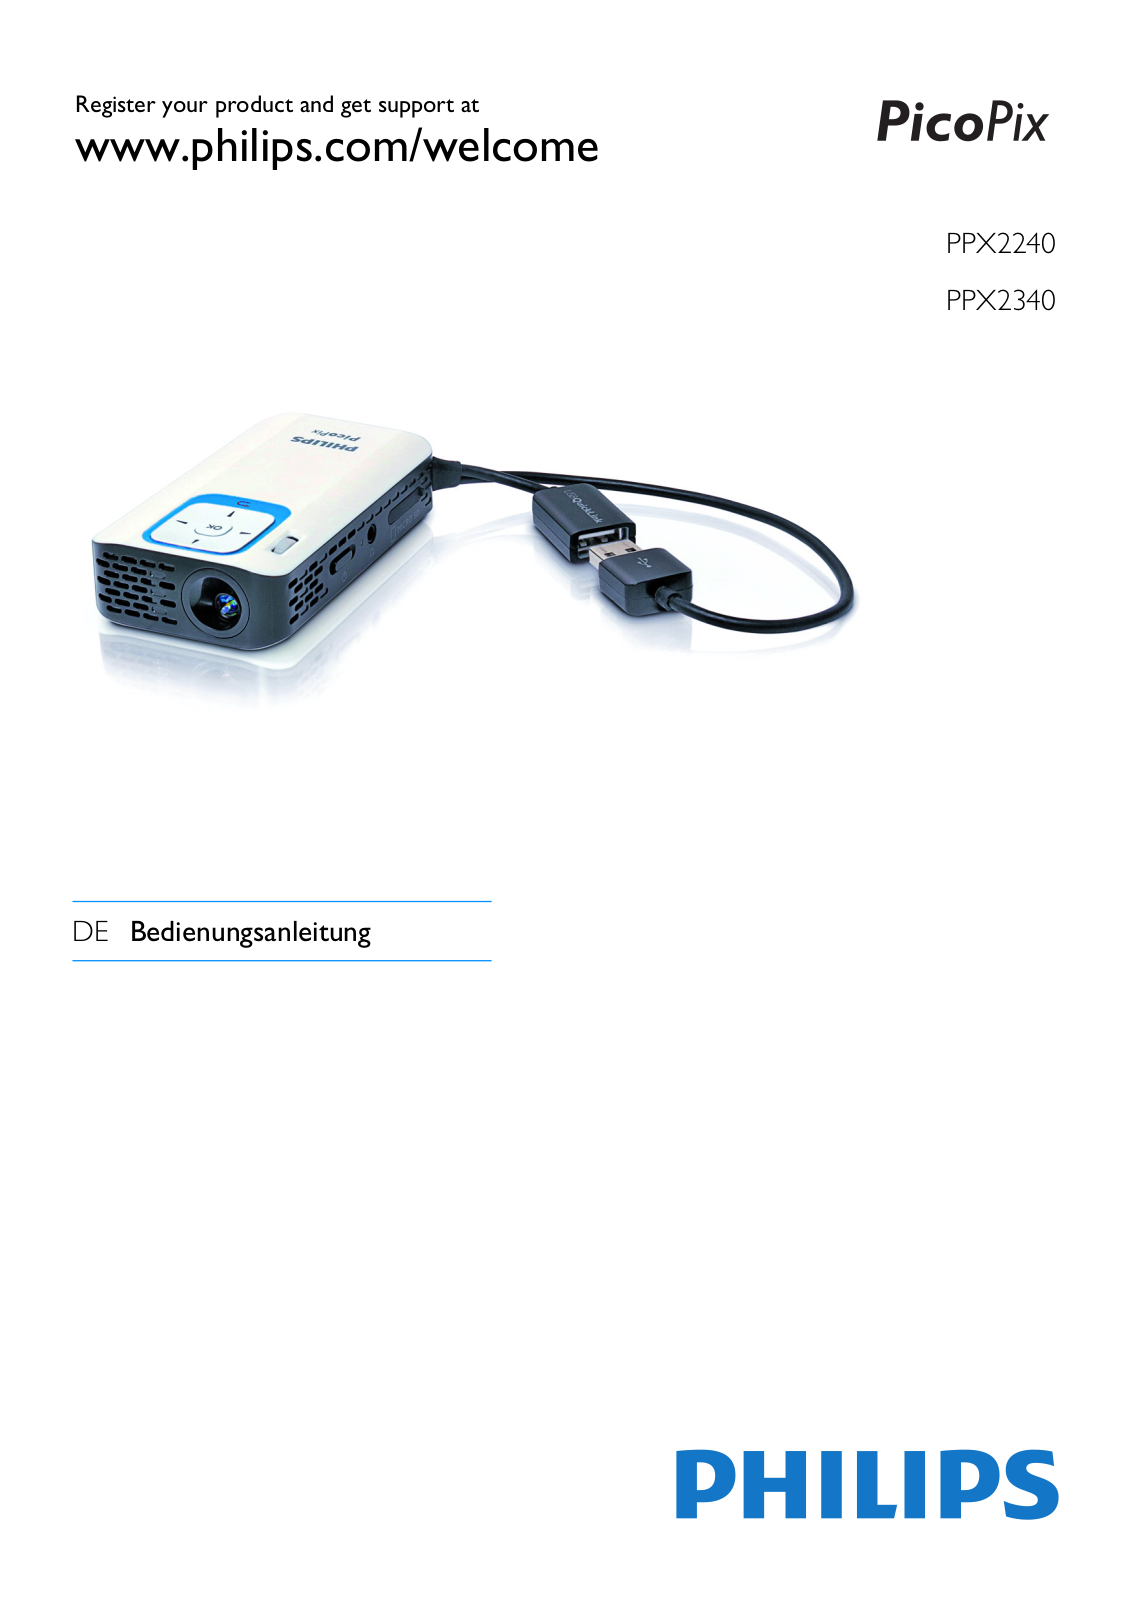 Philips PPX2240, PPX2340 User guide